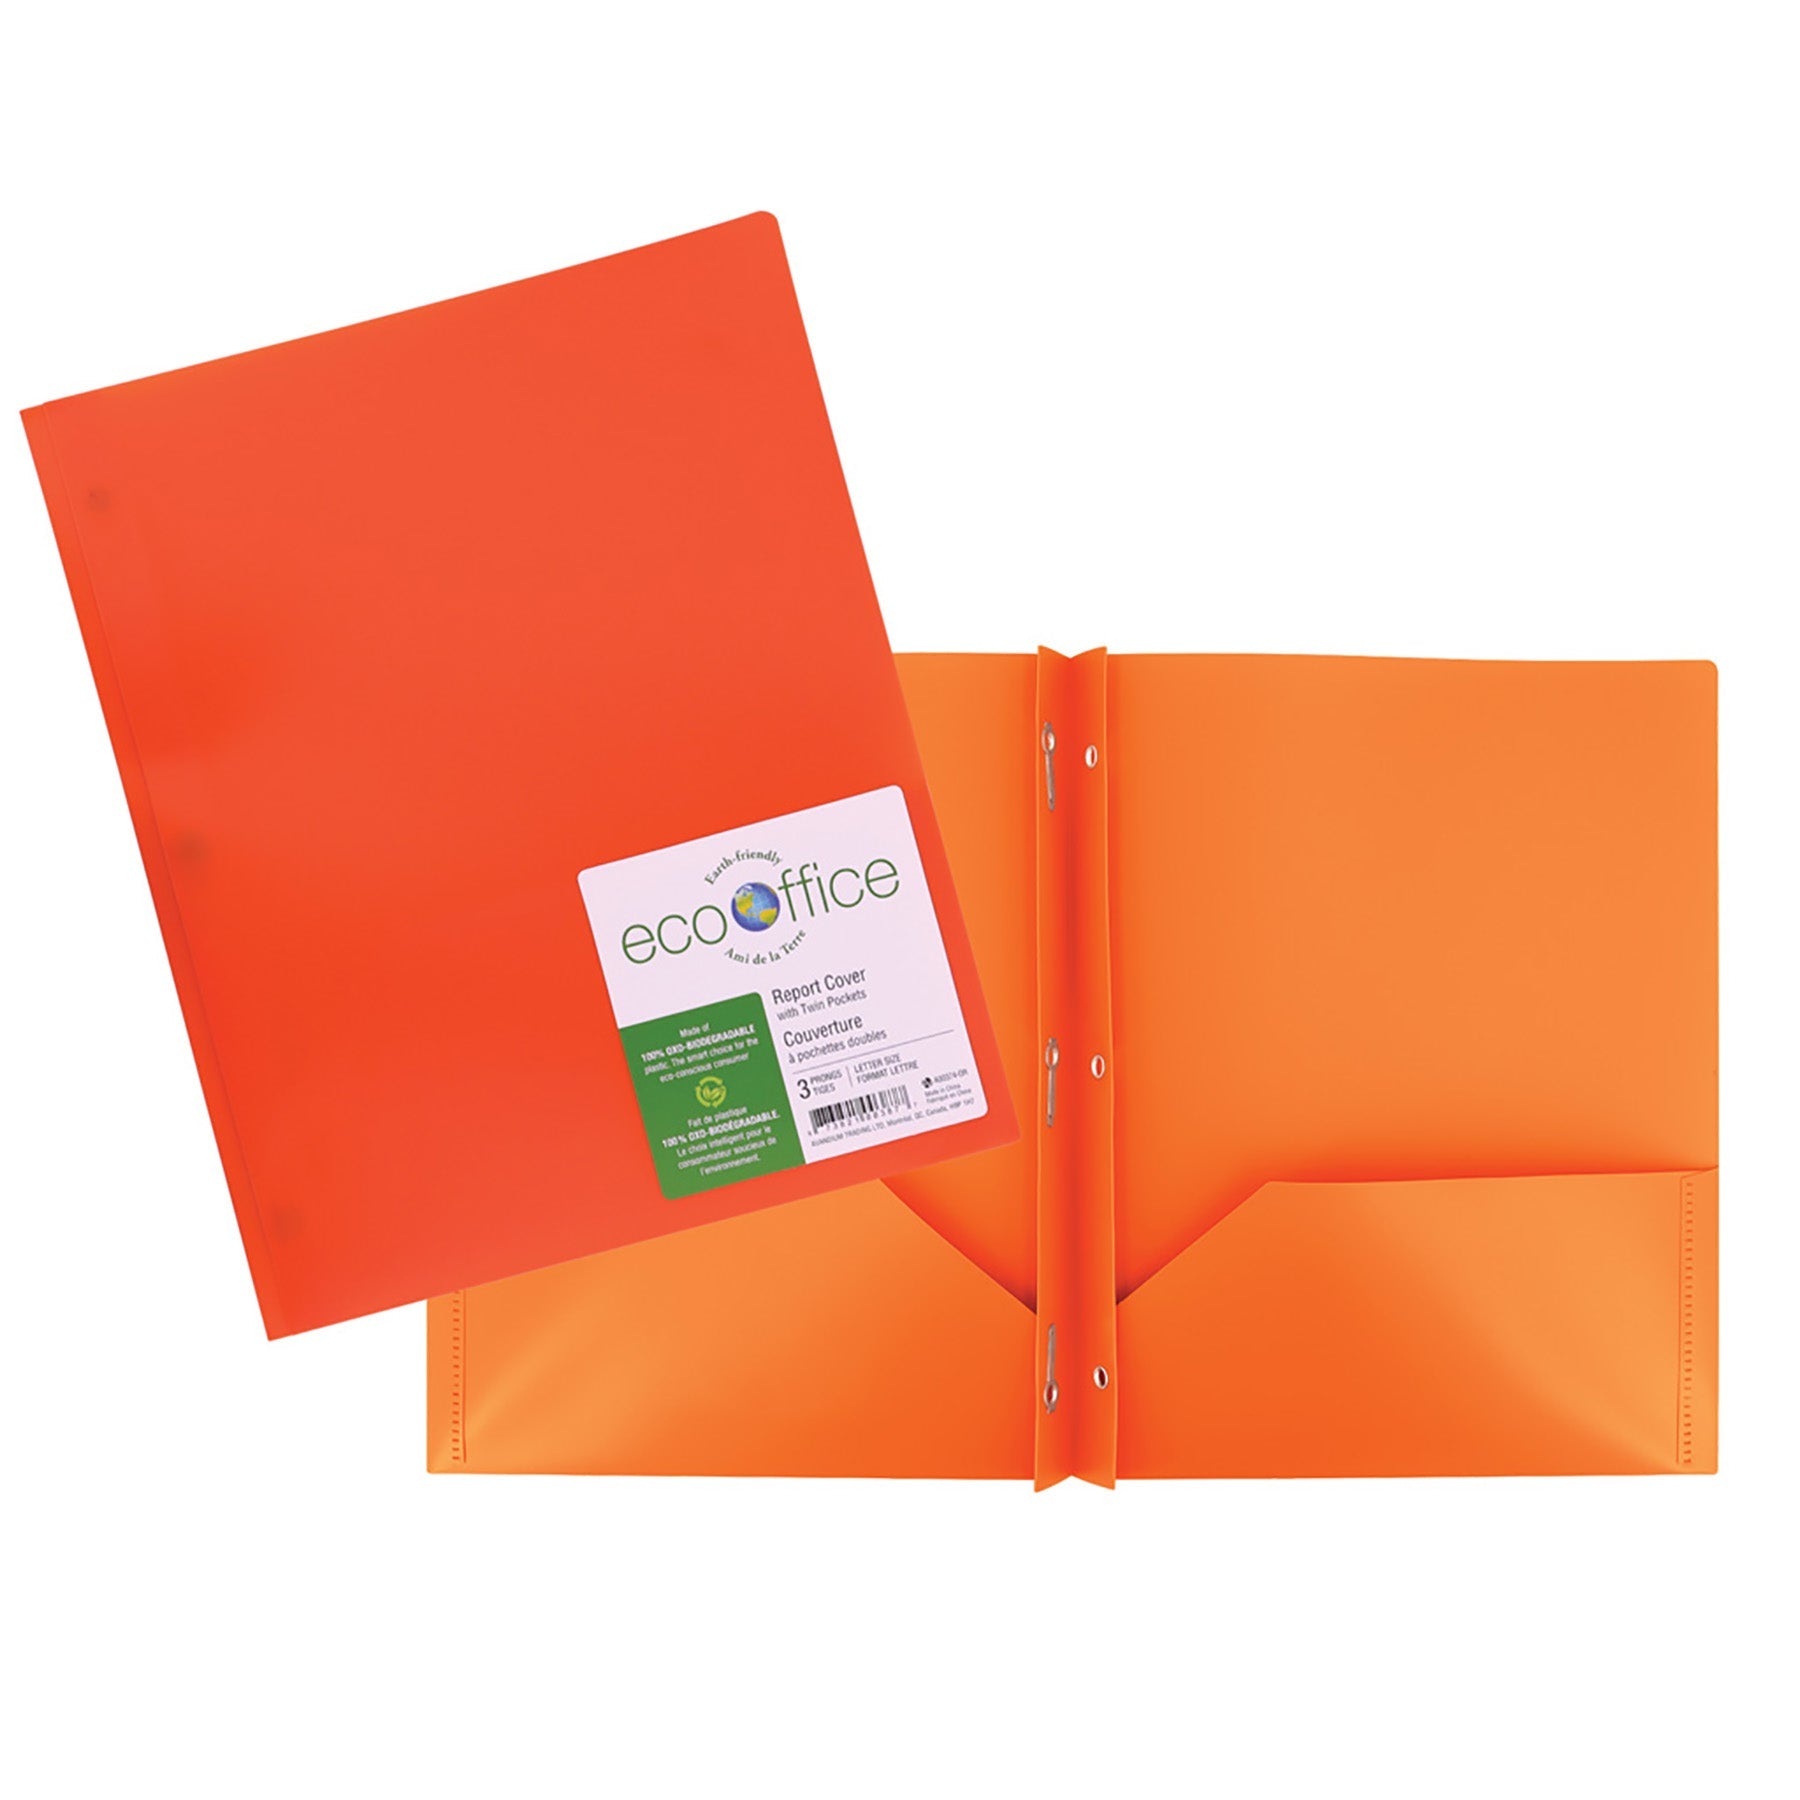 EcoOffice 3-Prong Report Cover 2 Pockets Orange Plastic 11.25x9.25in